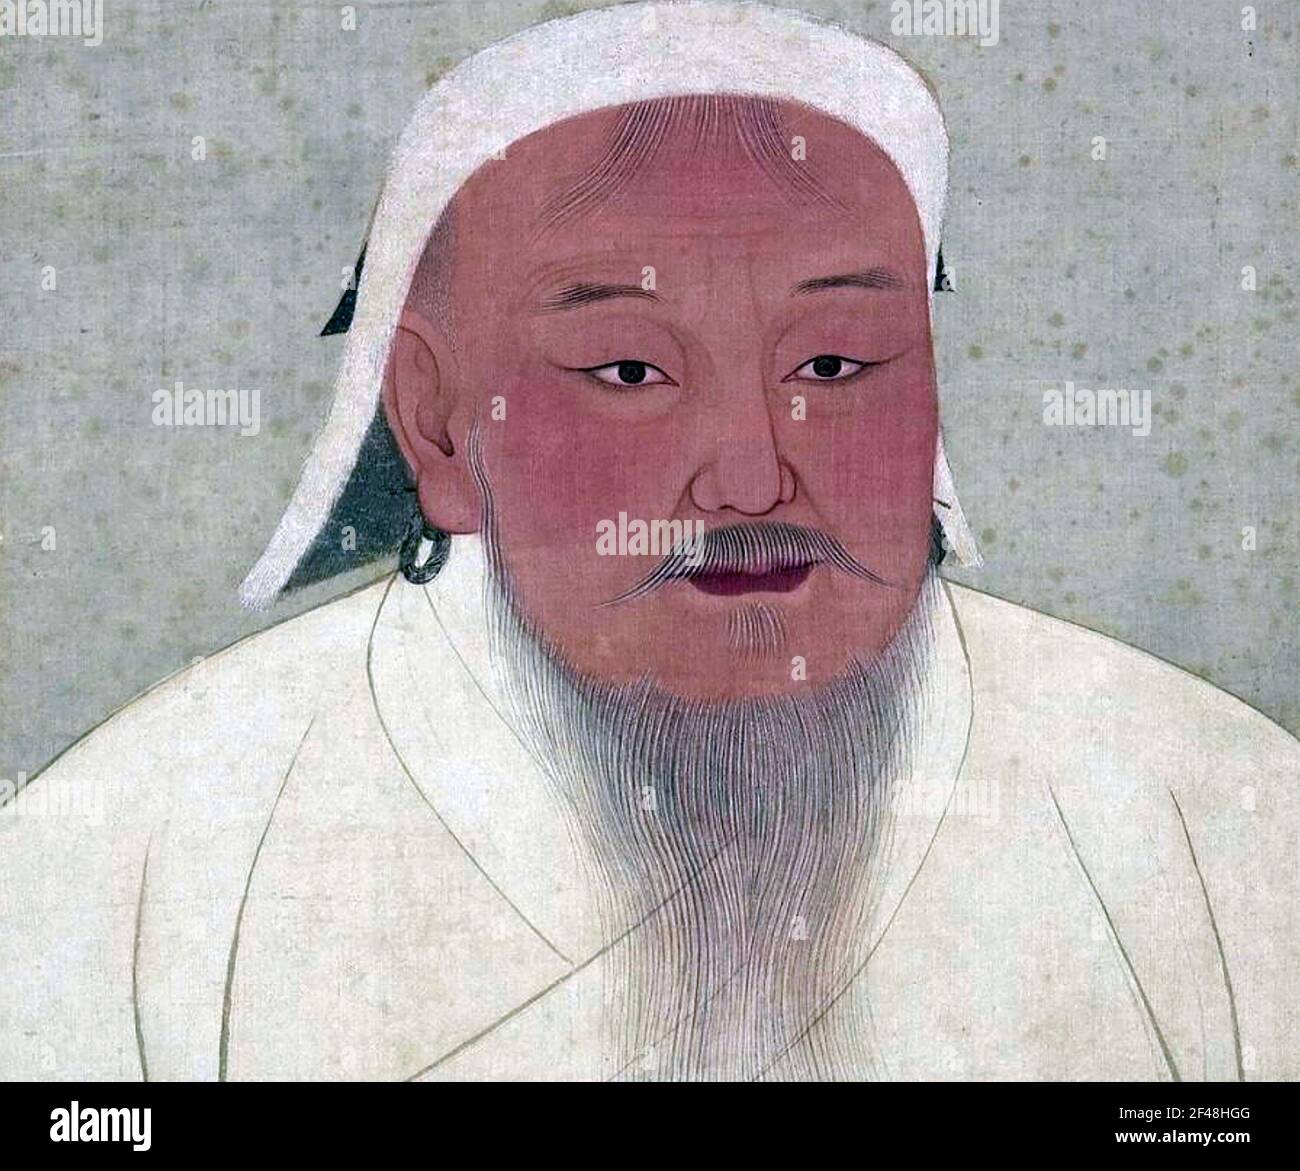 GENGHIS KHAN (c 1158-1227) founder of the Mongul Empire in a 14th century Tuan era album Stock Photo